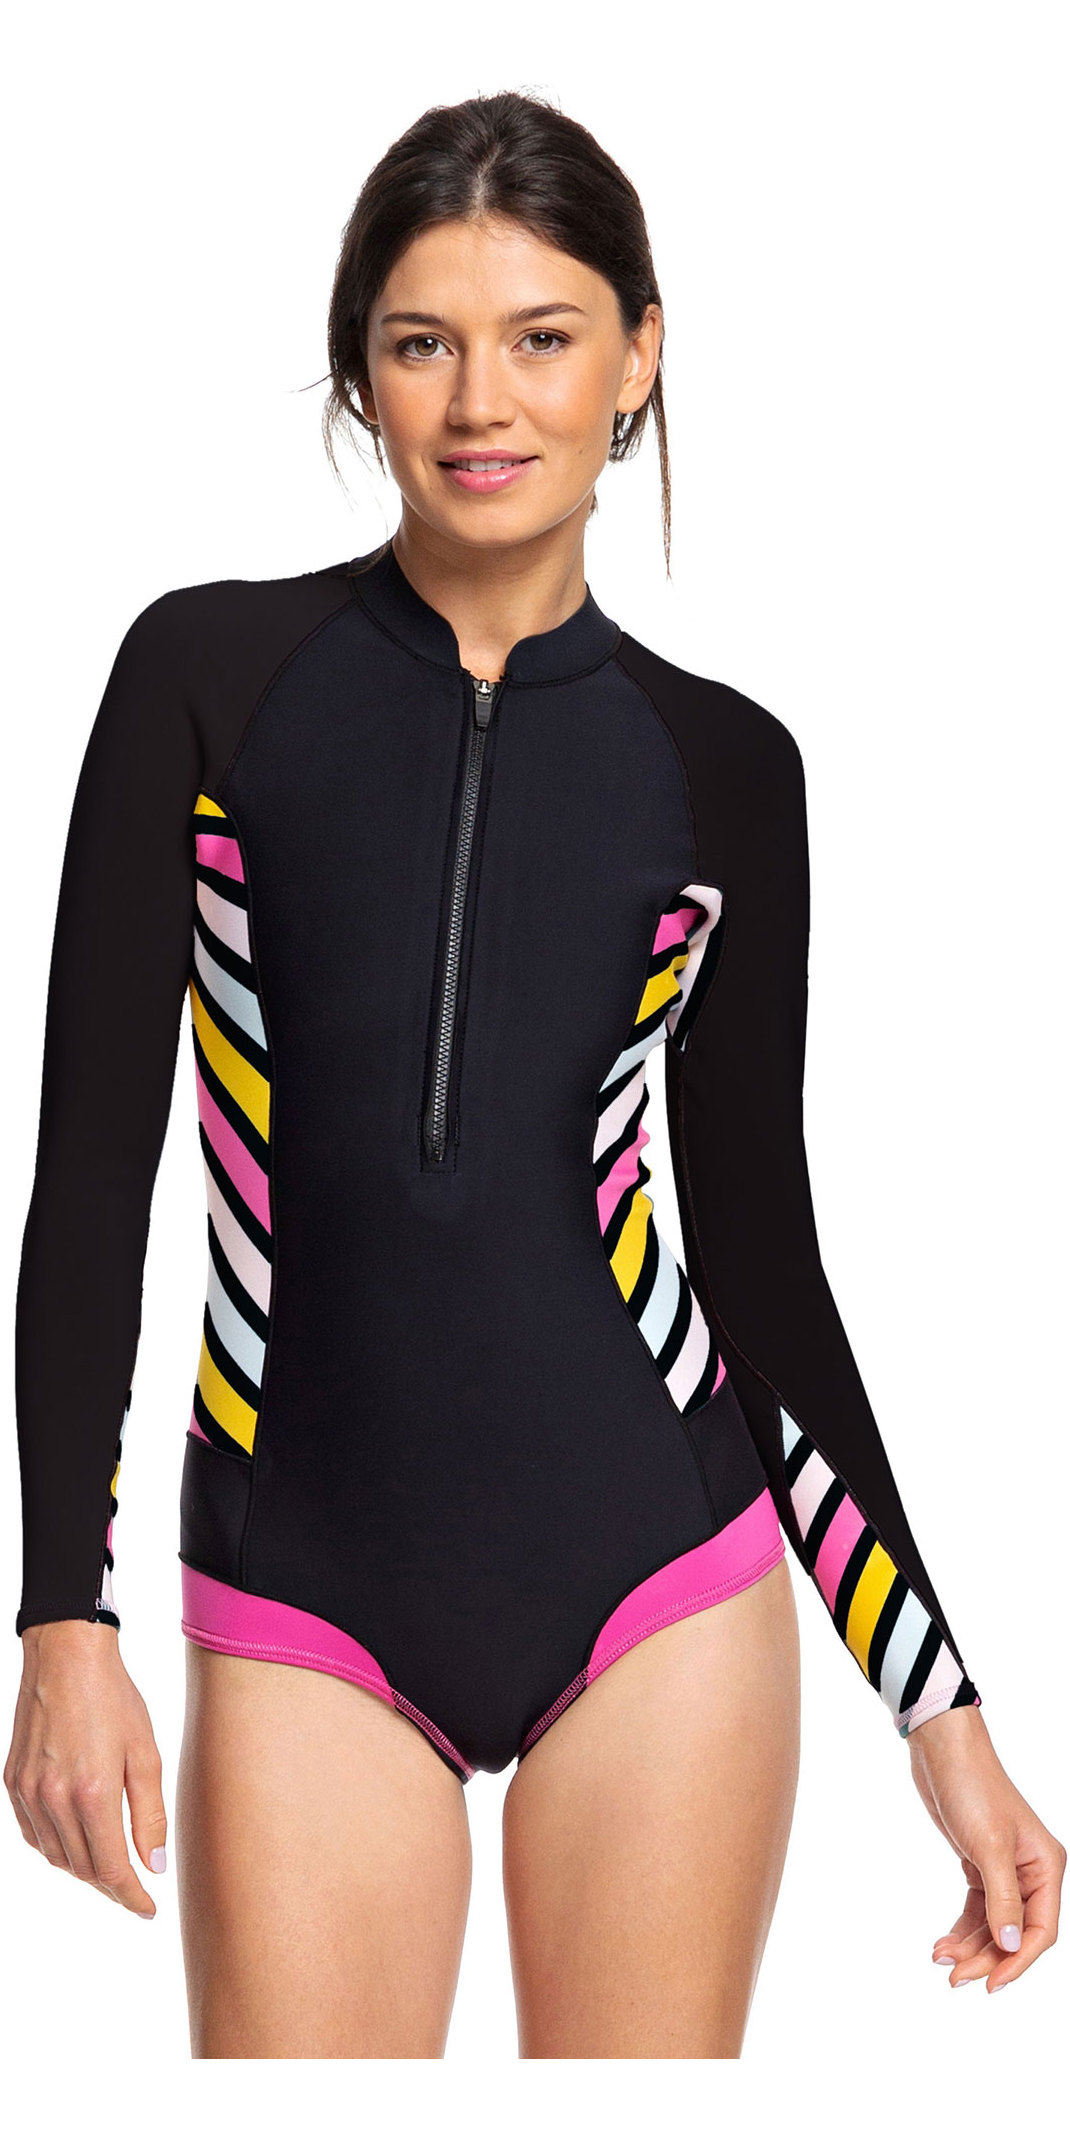 2019 Roxy Womens 1mm Pop Surf Long Sleeve Cheeky Spring Shorty Wetsuit Black Wetsuit Outlet